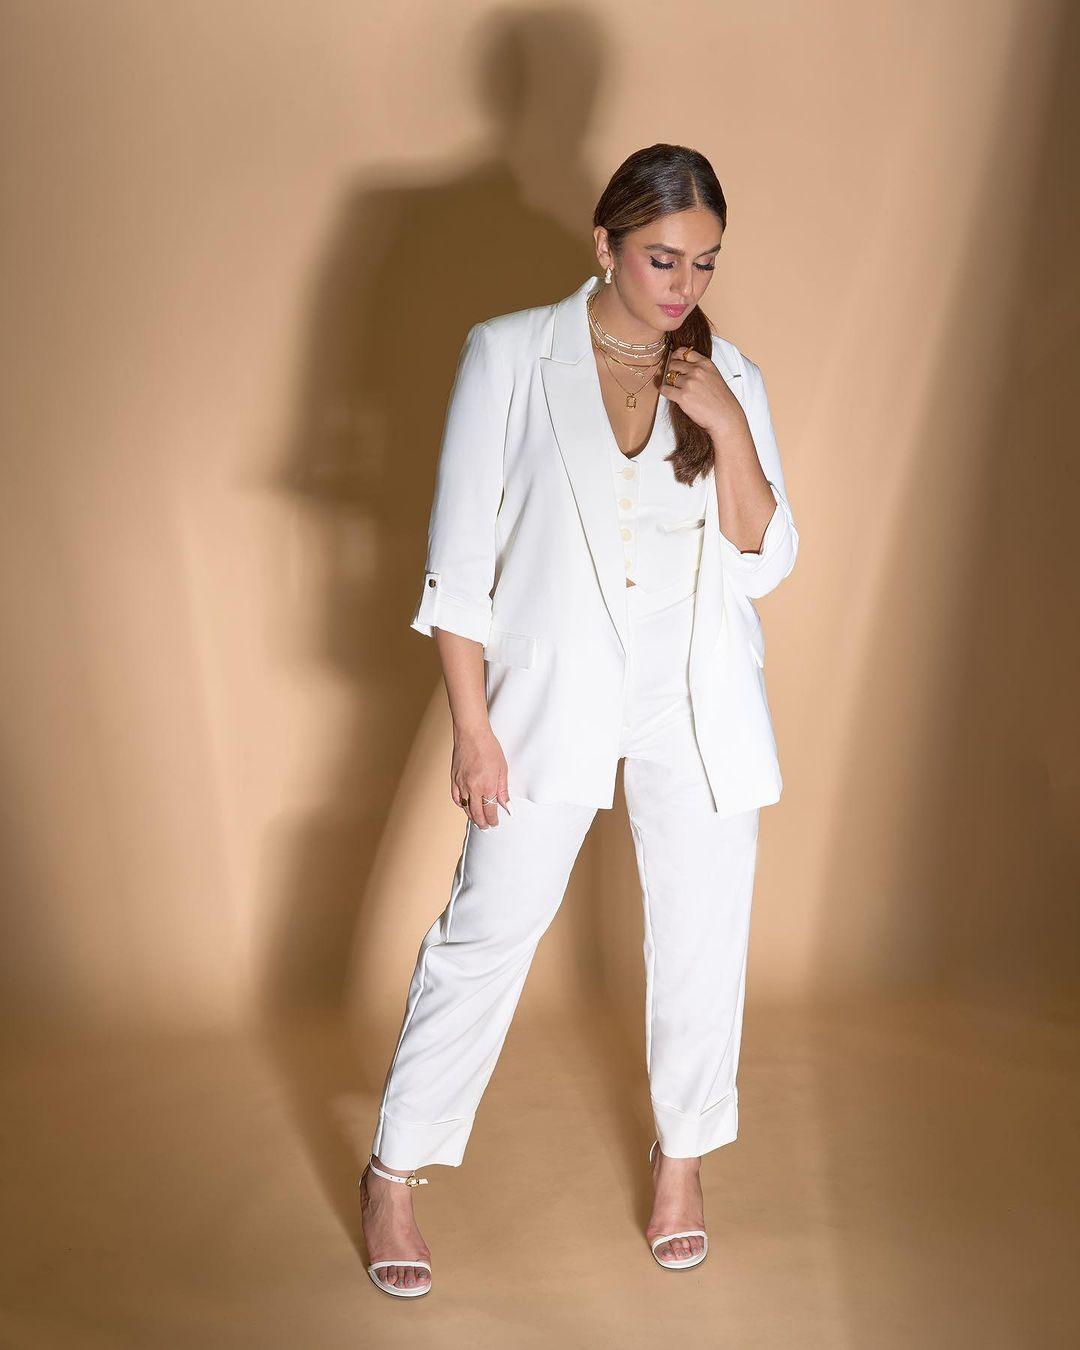 Timeless Power Suit: Huma Qureshi exudes confidence in white